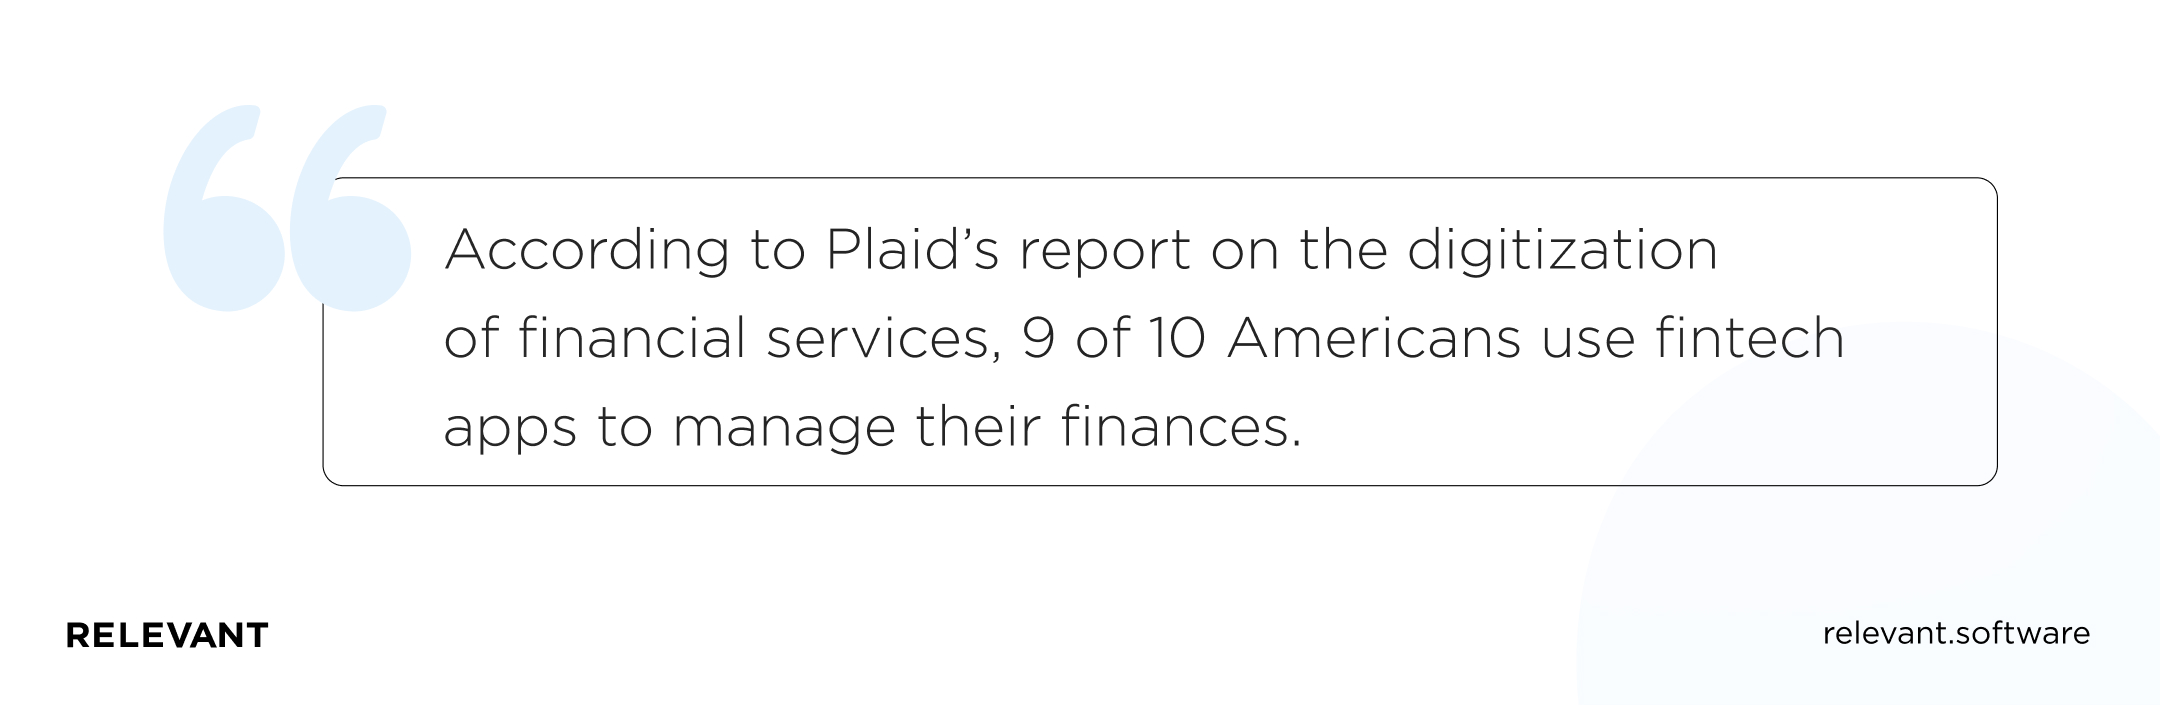 According to Plaid’s report on the digitization of financial services, 9 of 10 Americans use fintech apps to manage their finances.